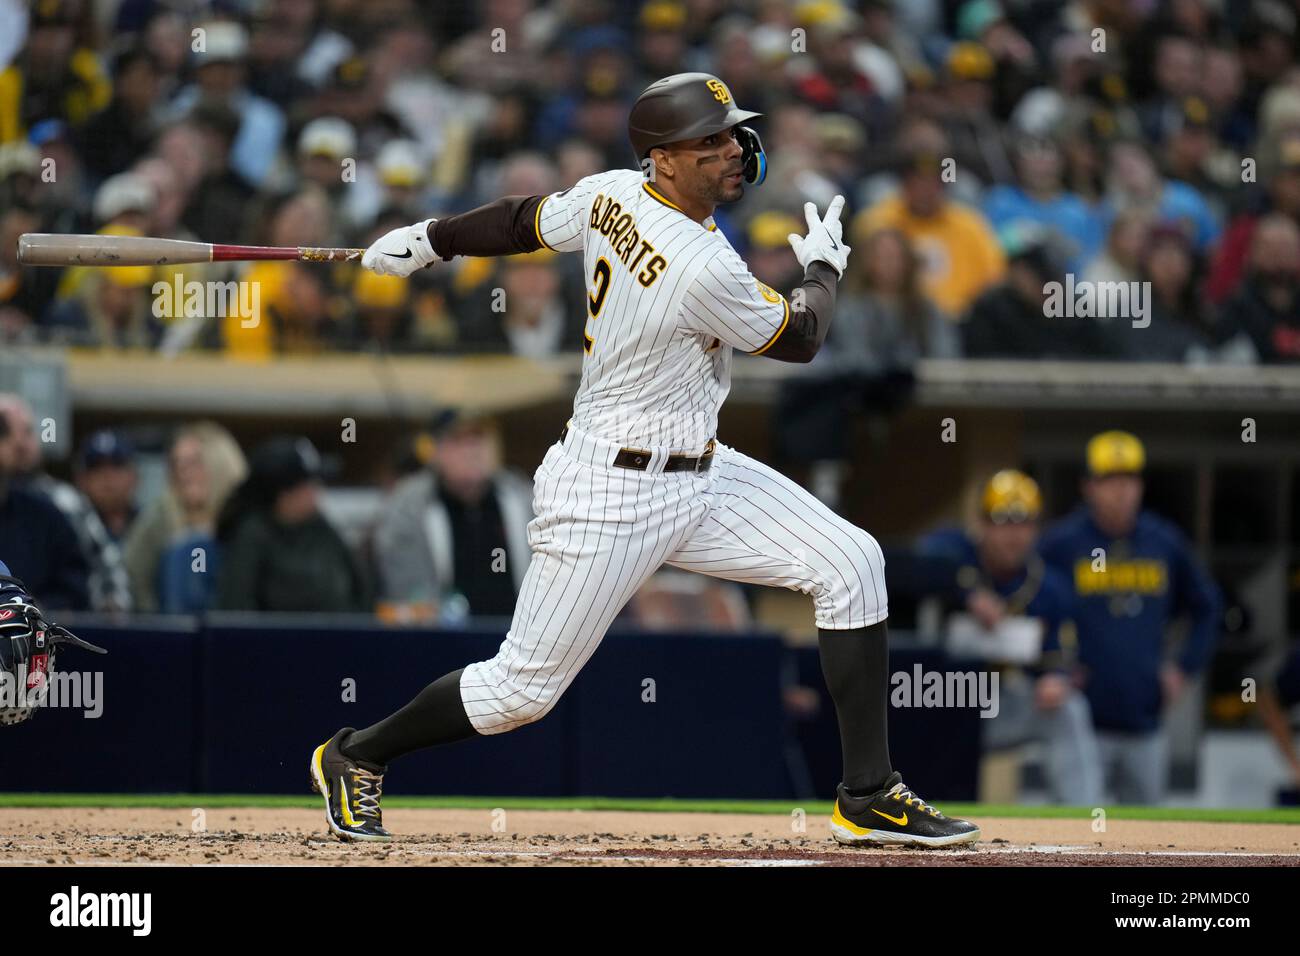 San Diego Padres' Xander Bogaerts batting during the second inning